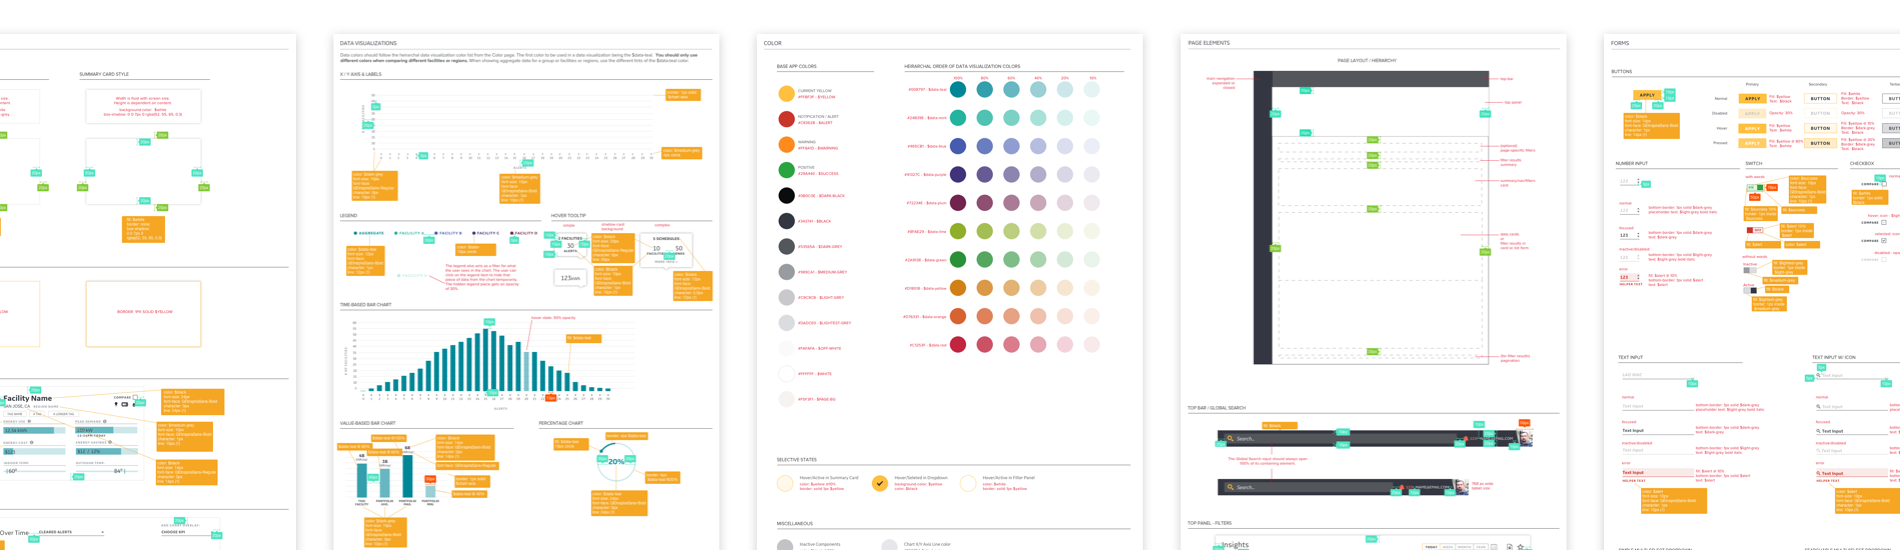 Images of style guide components